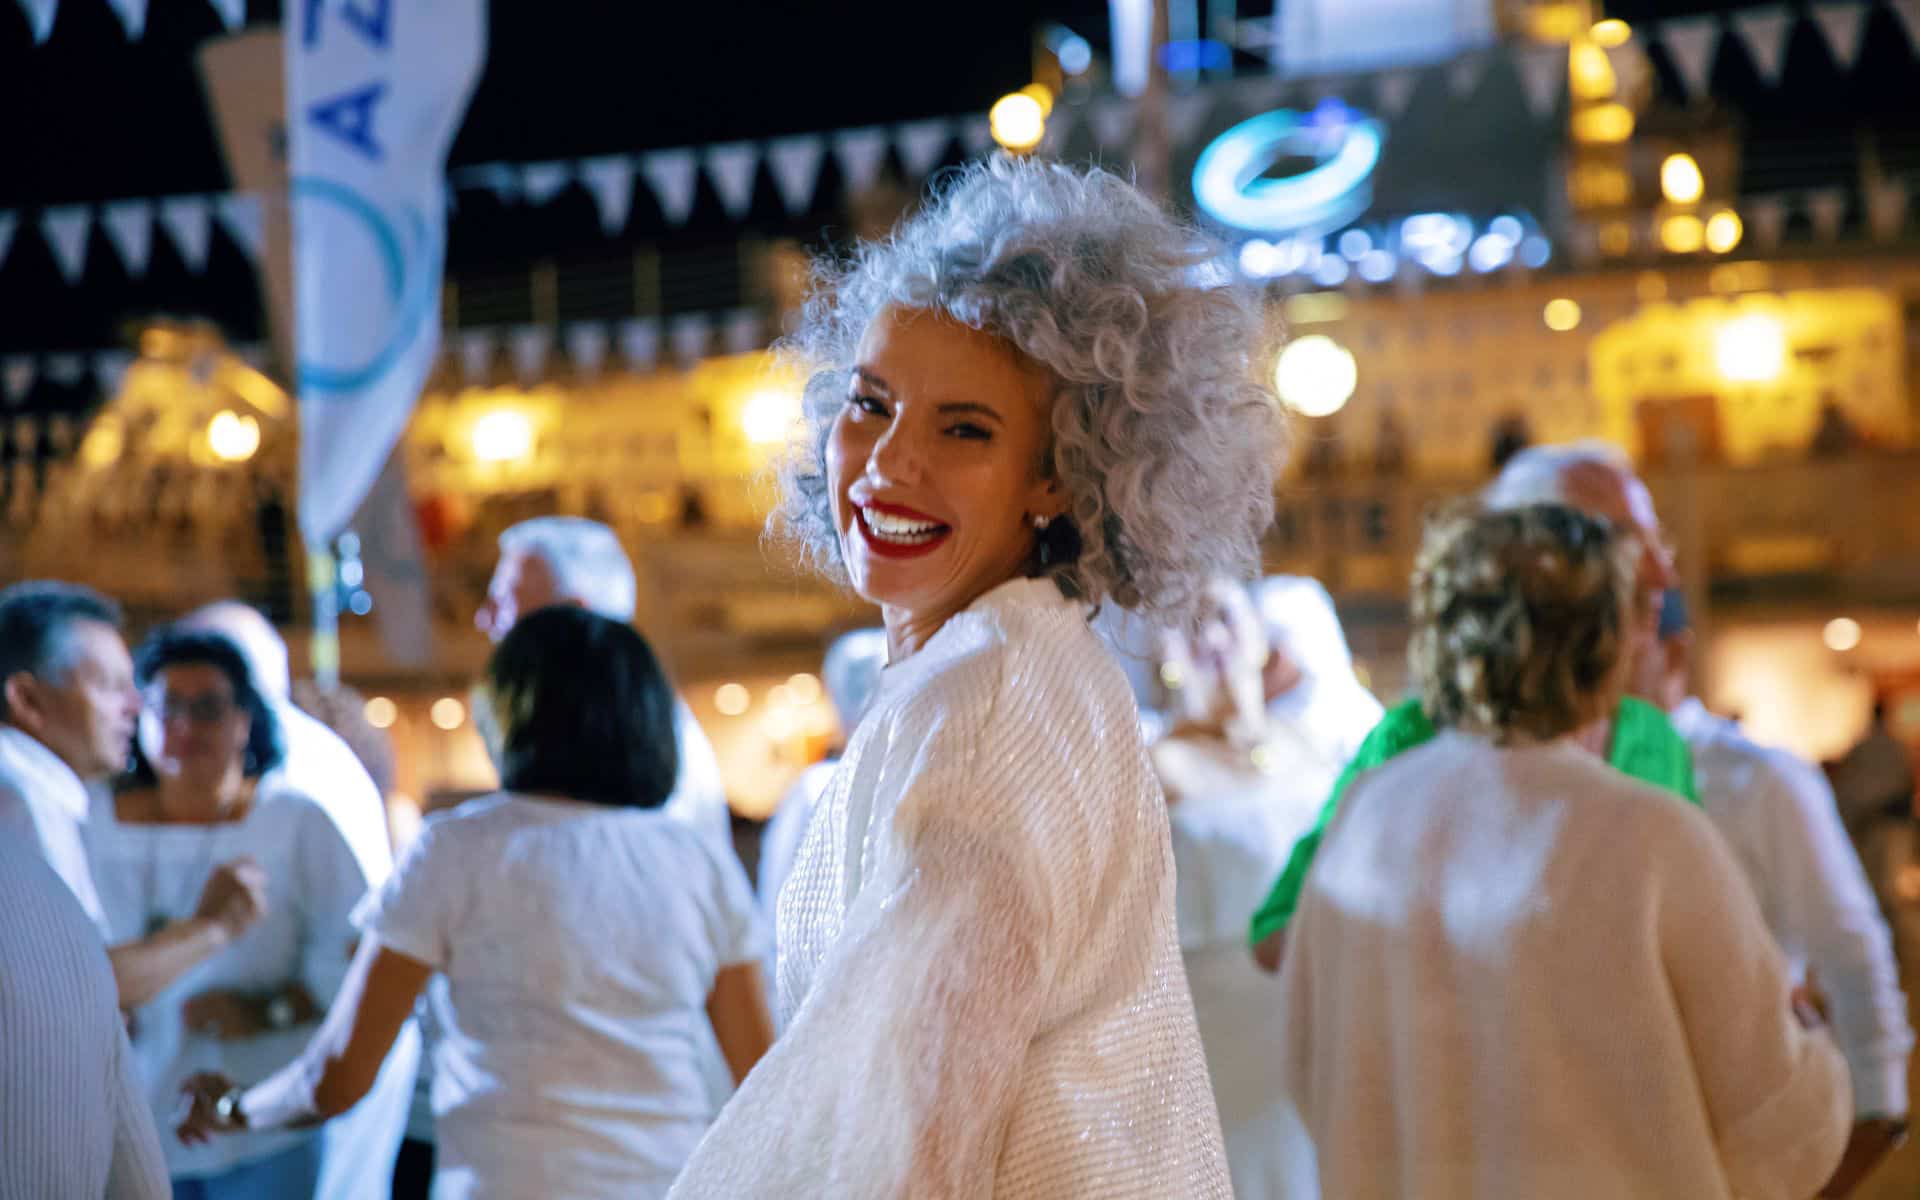 White Night Parties like this one were included in the Azamara Circle loyalty program suvery.